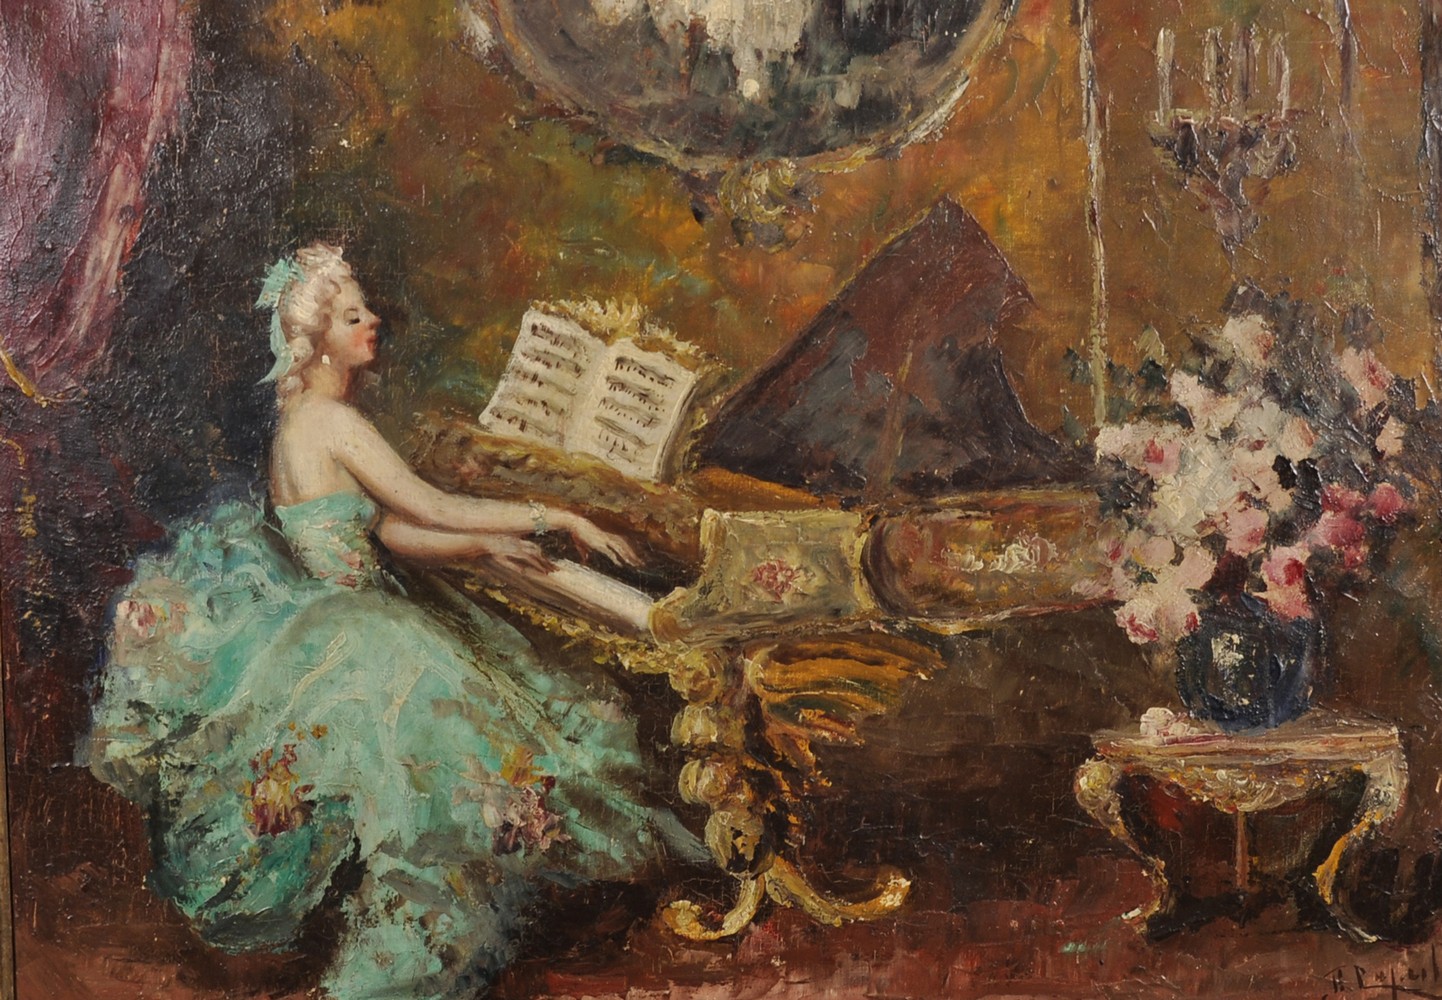 Early 20th Century Continental School. Elegant Lady Playing a Piano in a Lavish Interior, Oil on